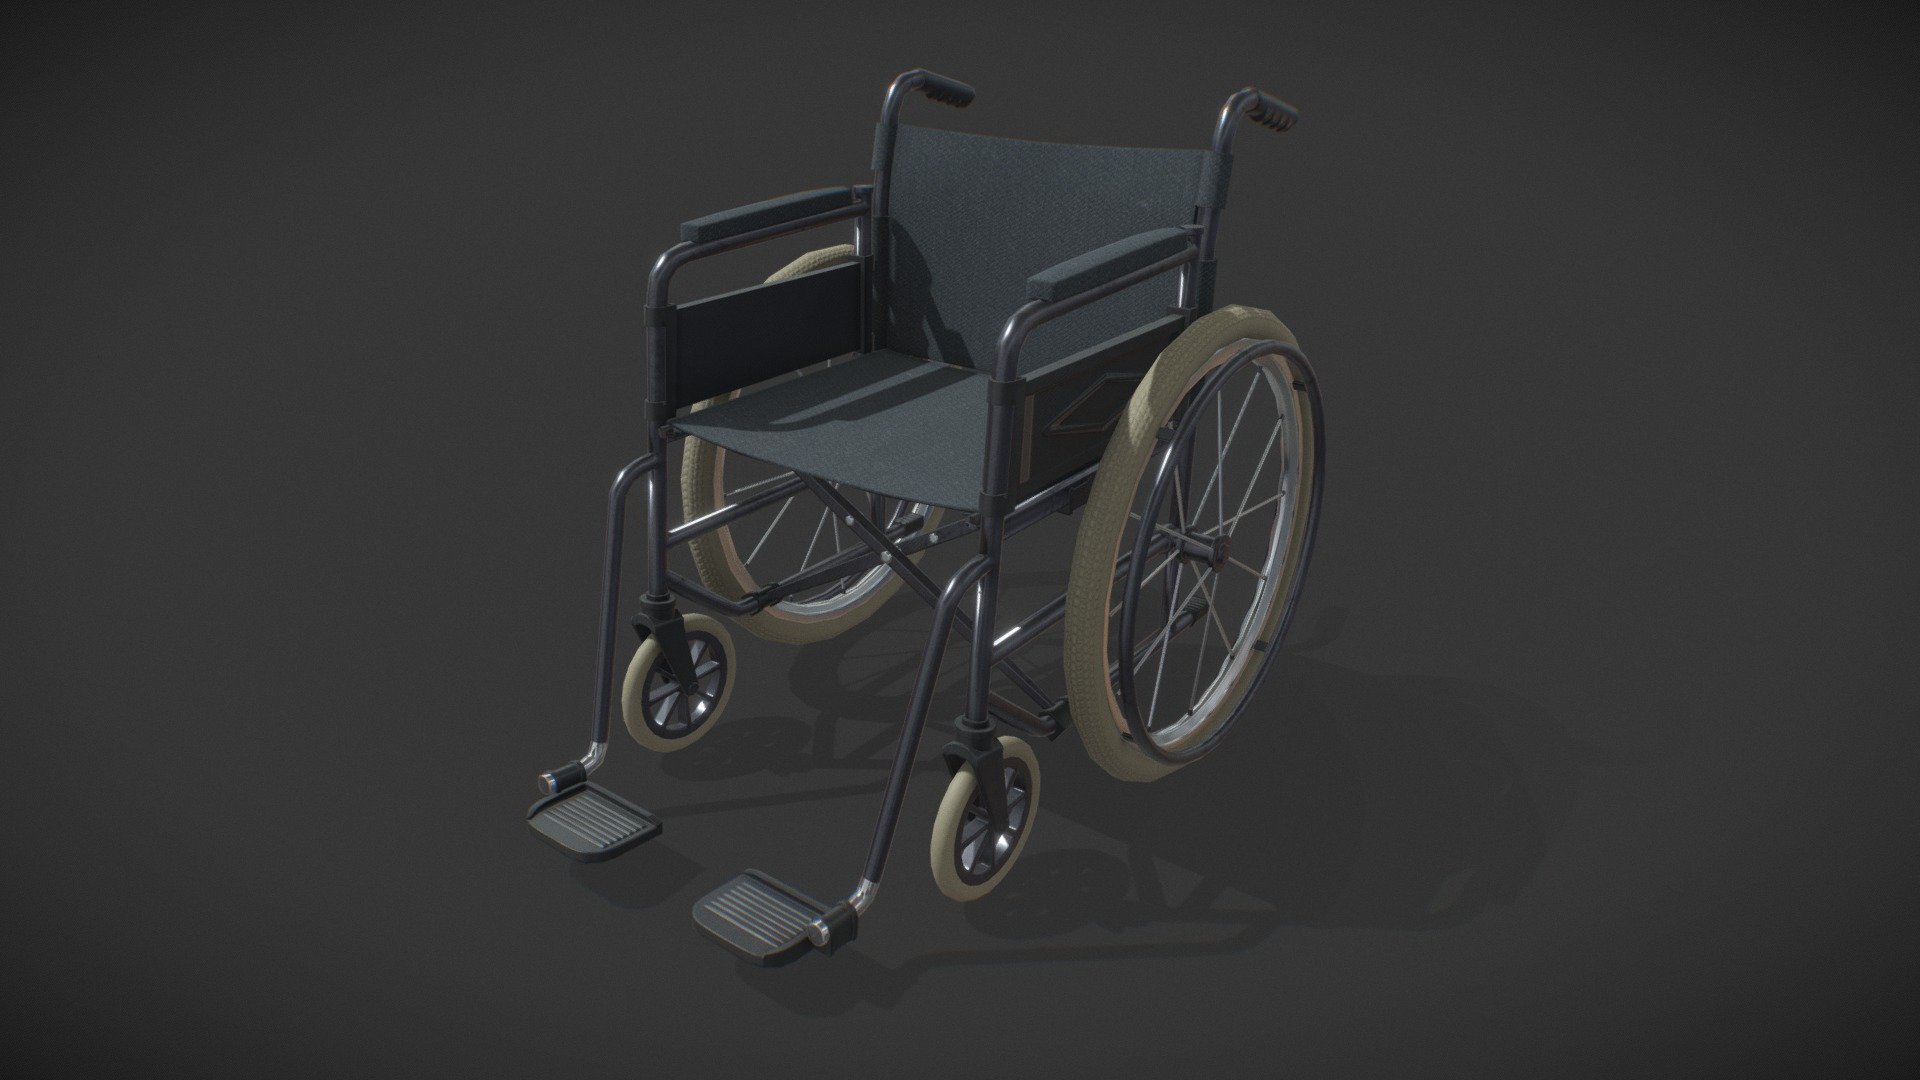 Lowpoly gameredy model of wheelchair made with Blender and textured in Substance Painter.

Additional file include: FBX low and high poly version, original .blend file and general PBR textures (Albedo, AO, Normal, Metallic, Roughness) - Wheelchair | LowPoly | PBR - 3D model by exotic_infinity 3d model